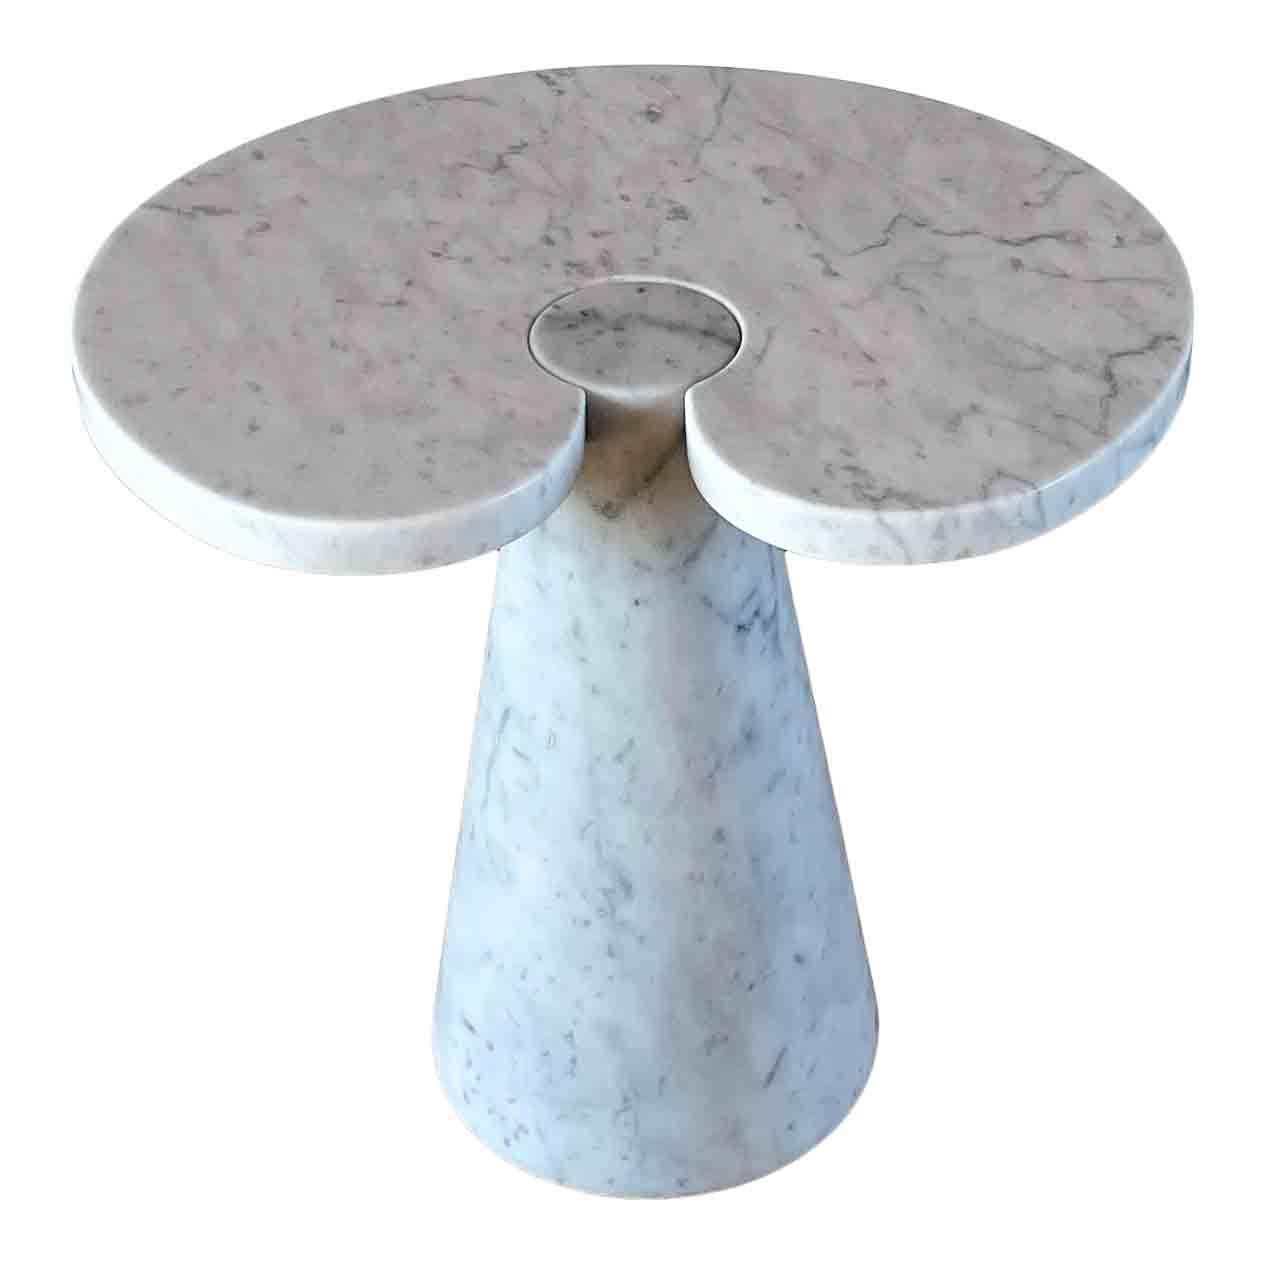 Angelo Mangiarotti Carrara Marble “Eros” Side Table for Skipper, 1971, Set of 2 For Sale 2